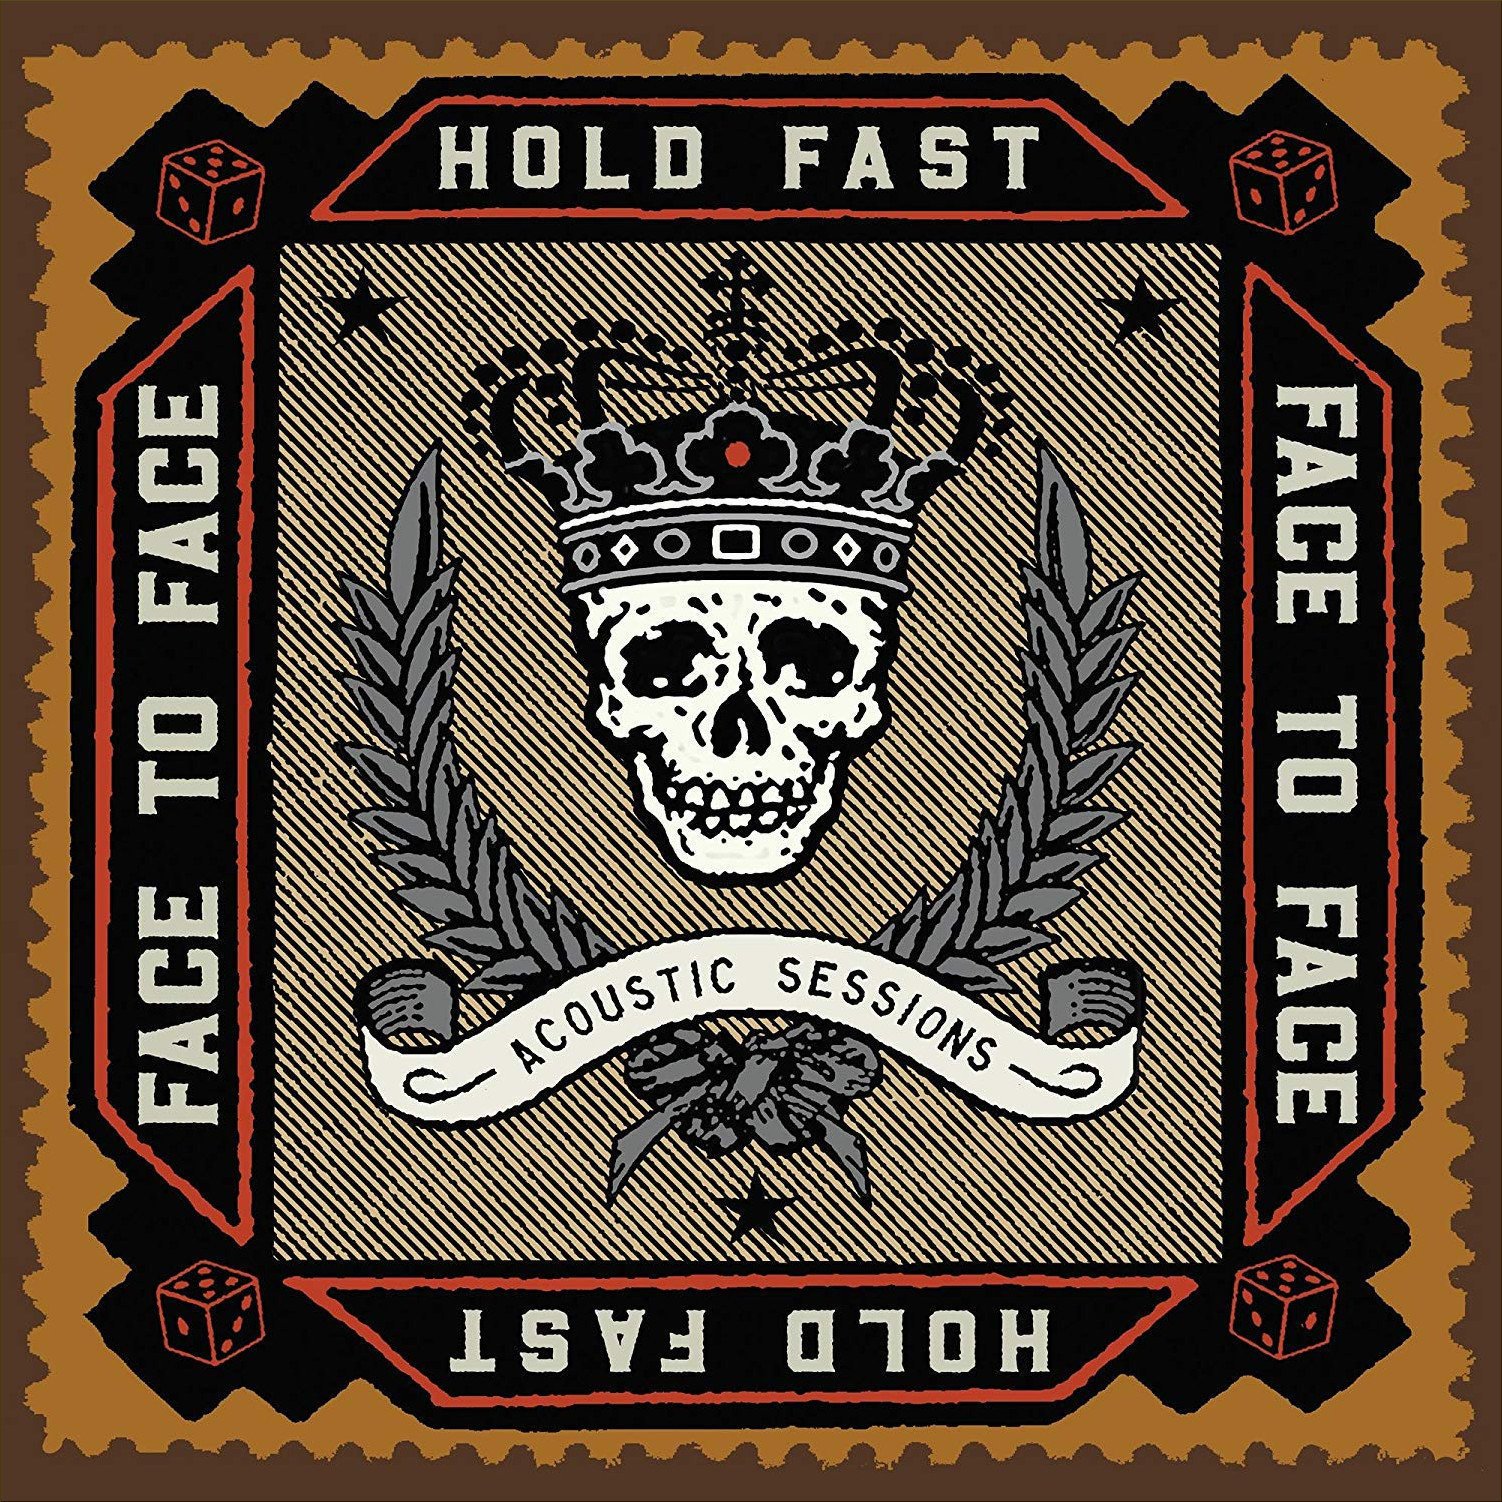 Vinylplade Face To Face - Hold Fast (Acoustic Sessions) (LP)